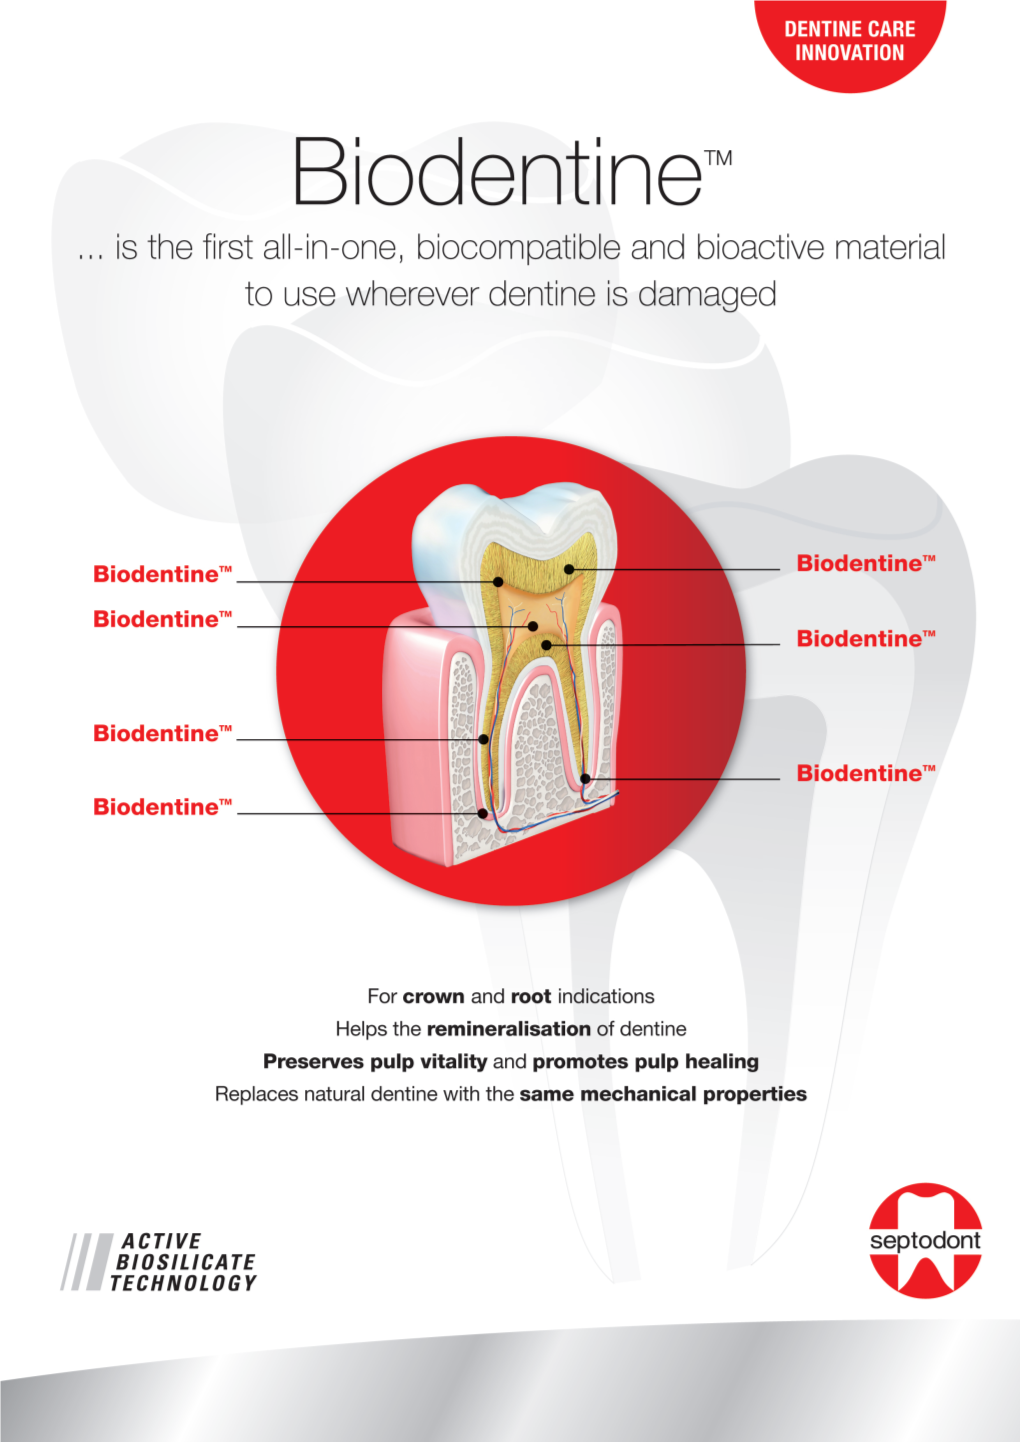 Wherever Dentine Is Damaged, You Can Use Biodentine